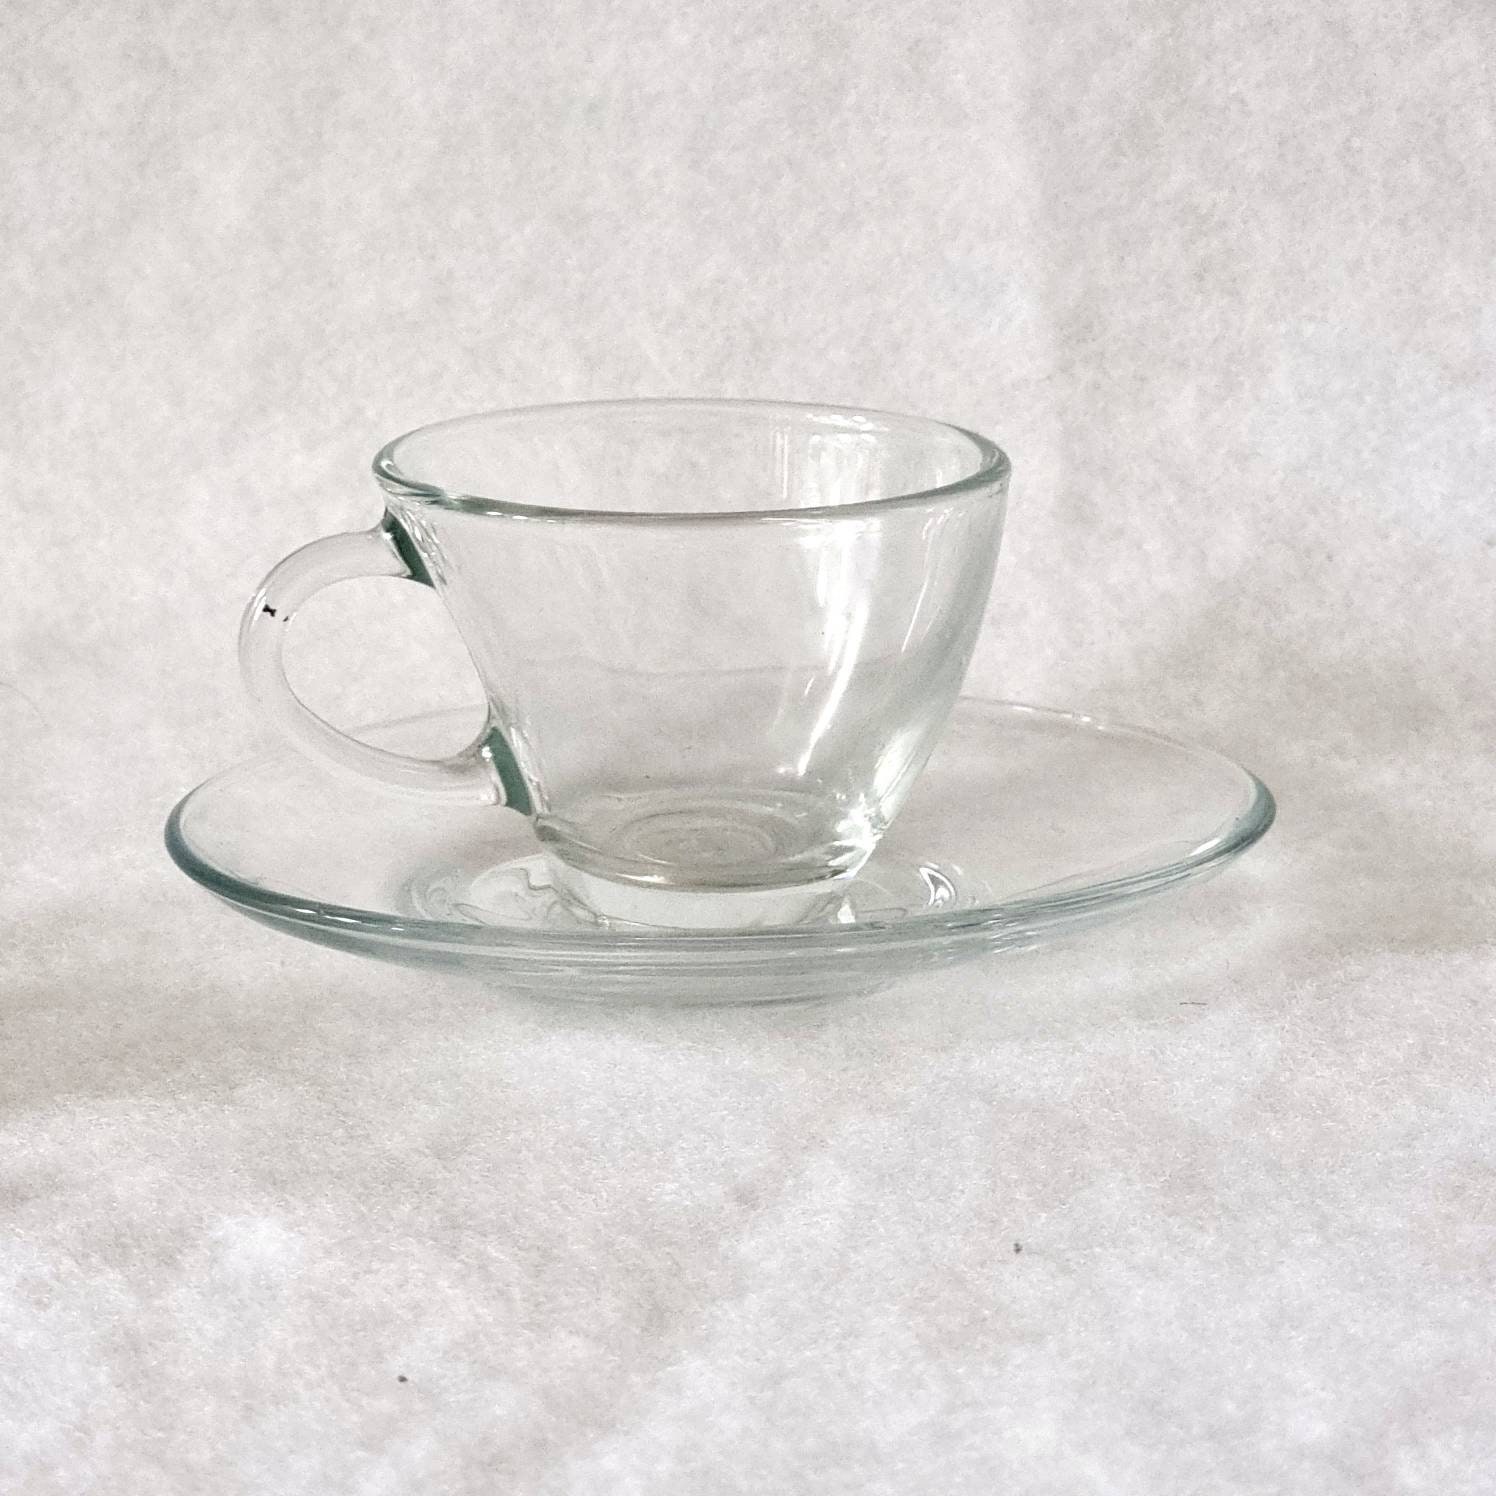 Pasabahce Barista Glass Espresso Cup & Saucer - Set of 6 (Clear)